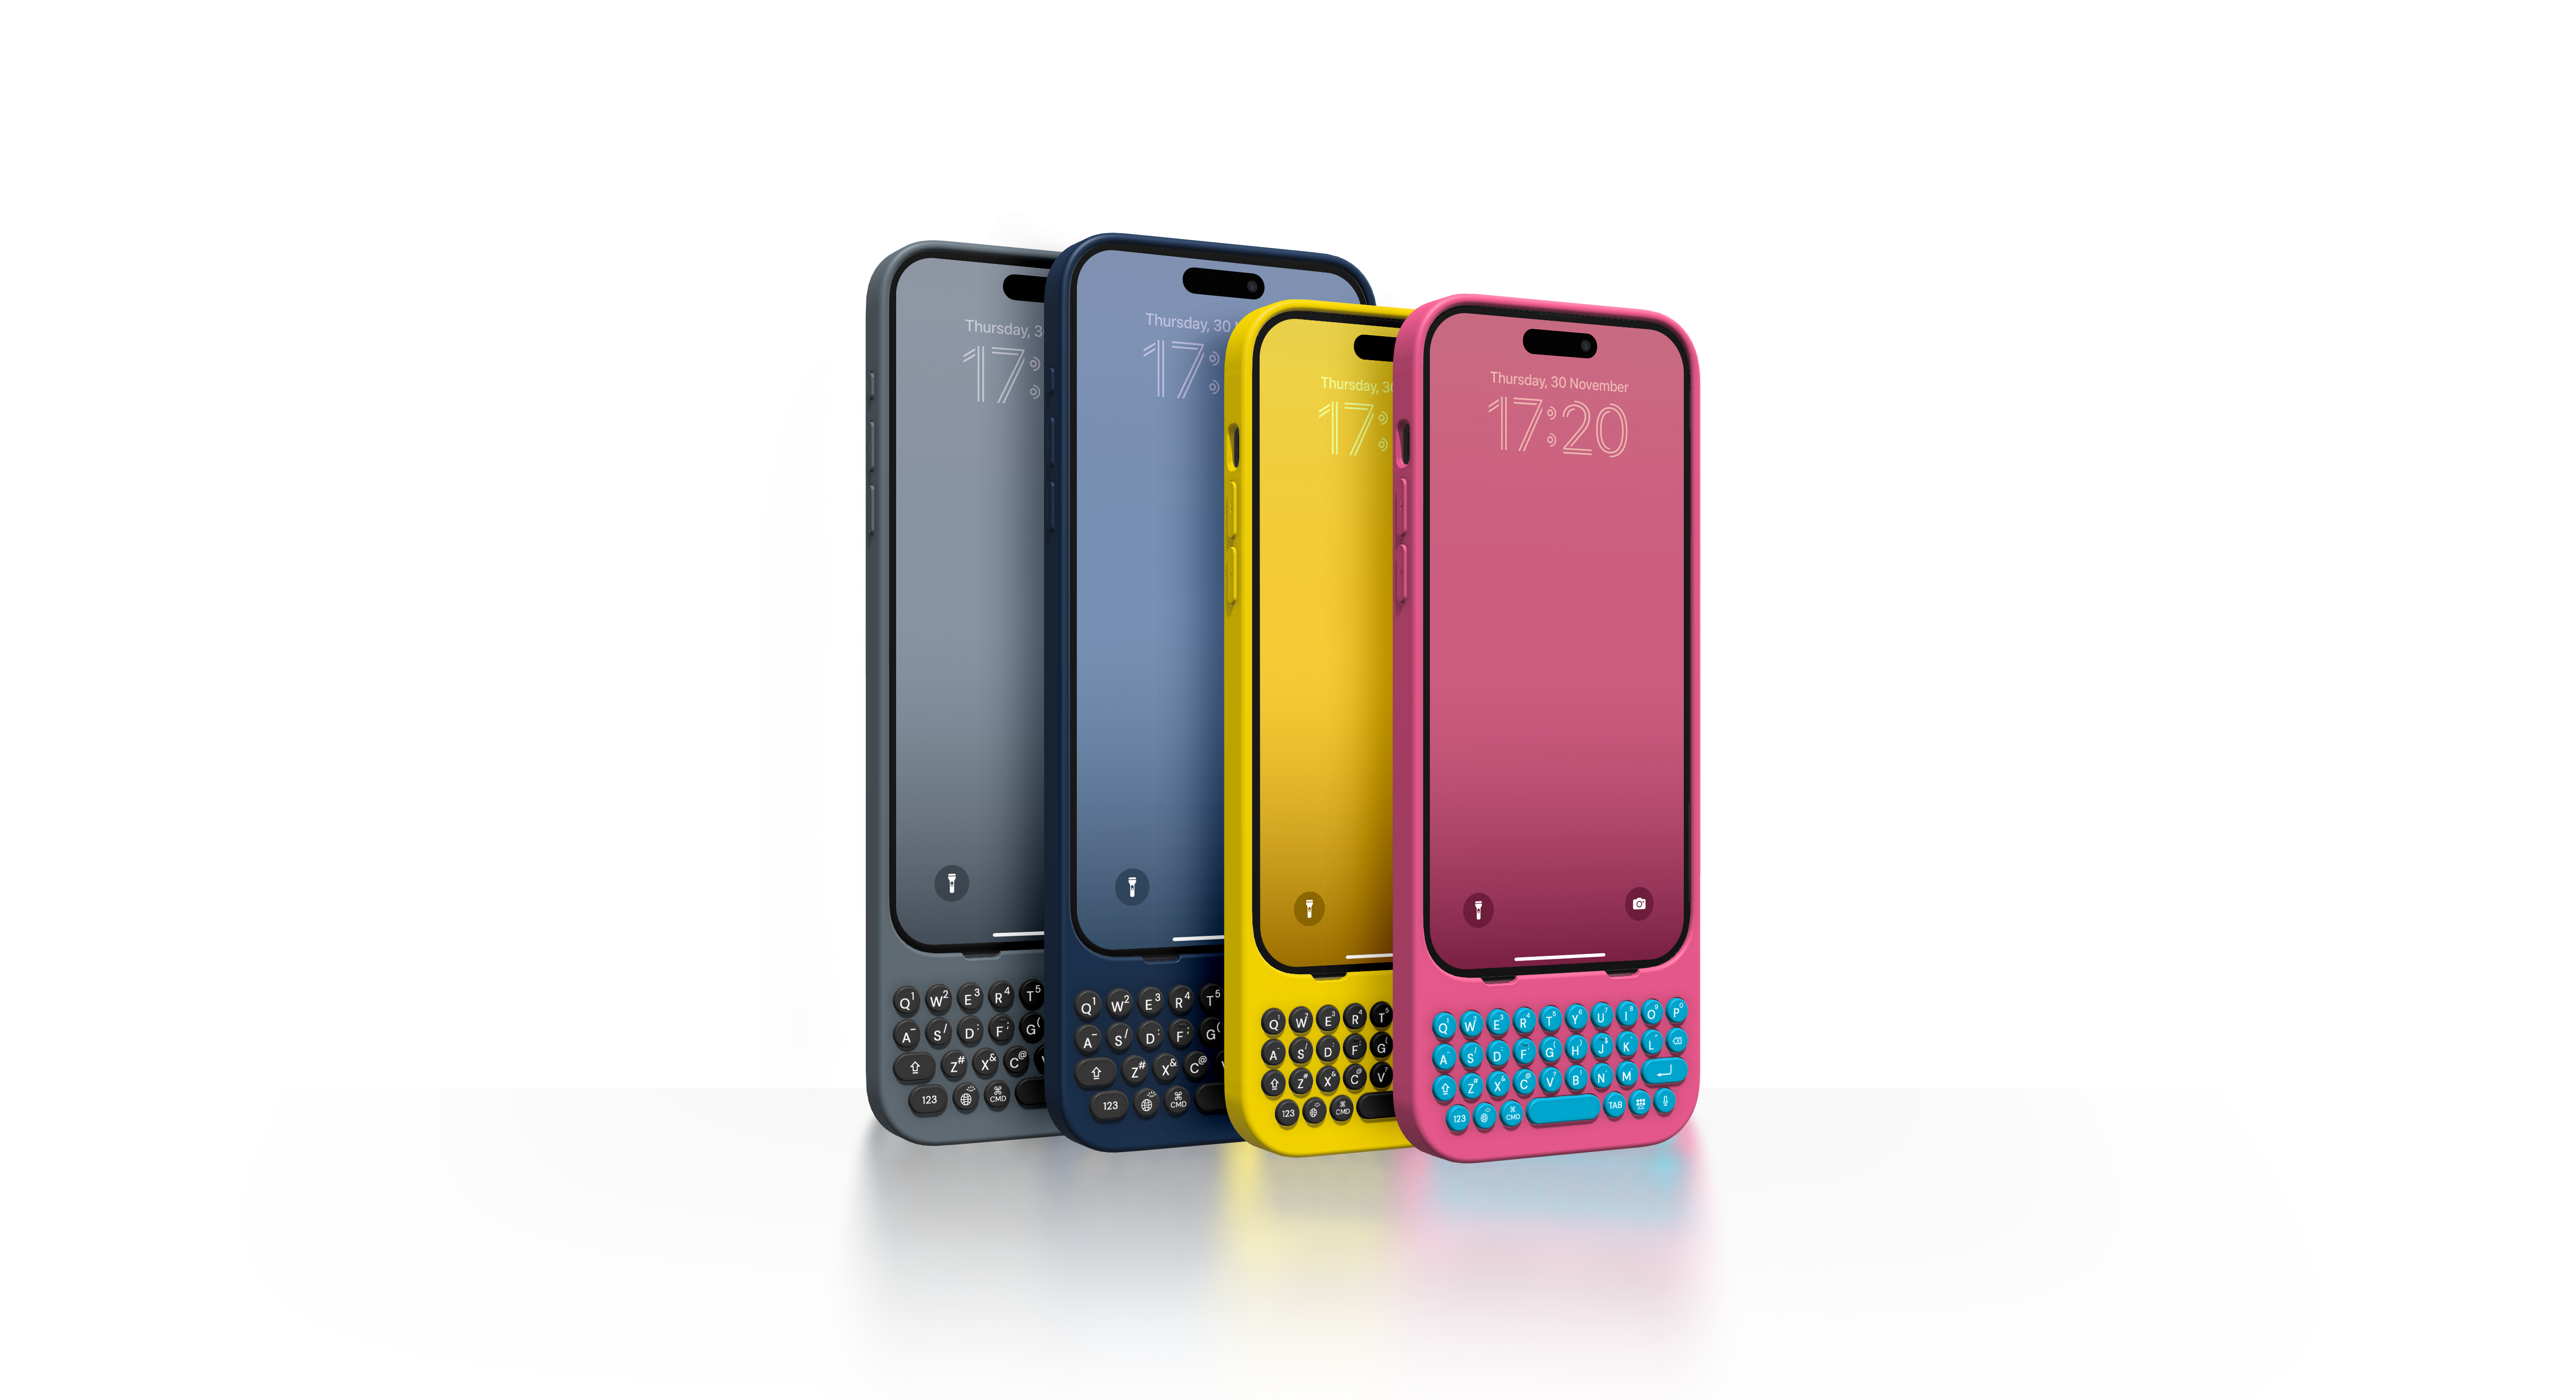 Clicks For iPhone - Now in four colors